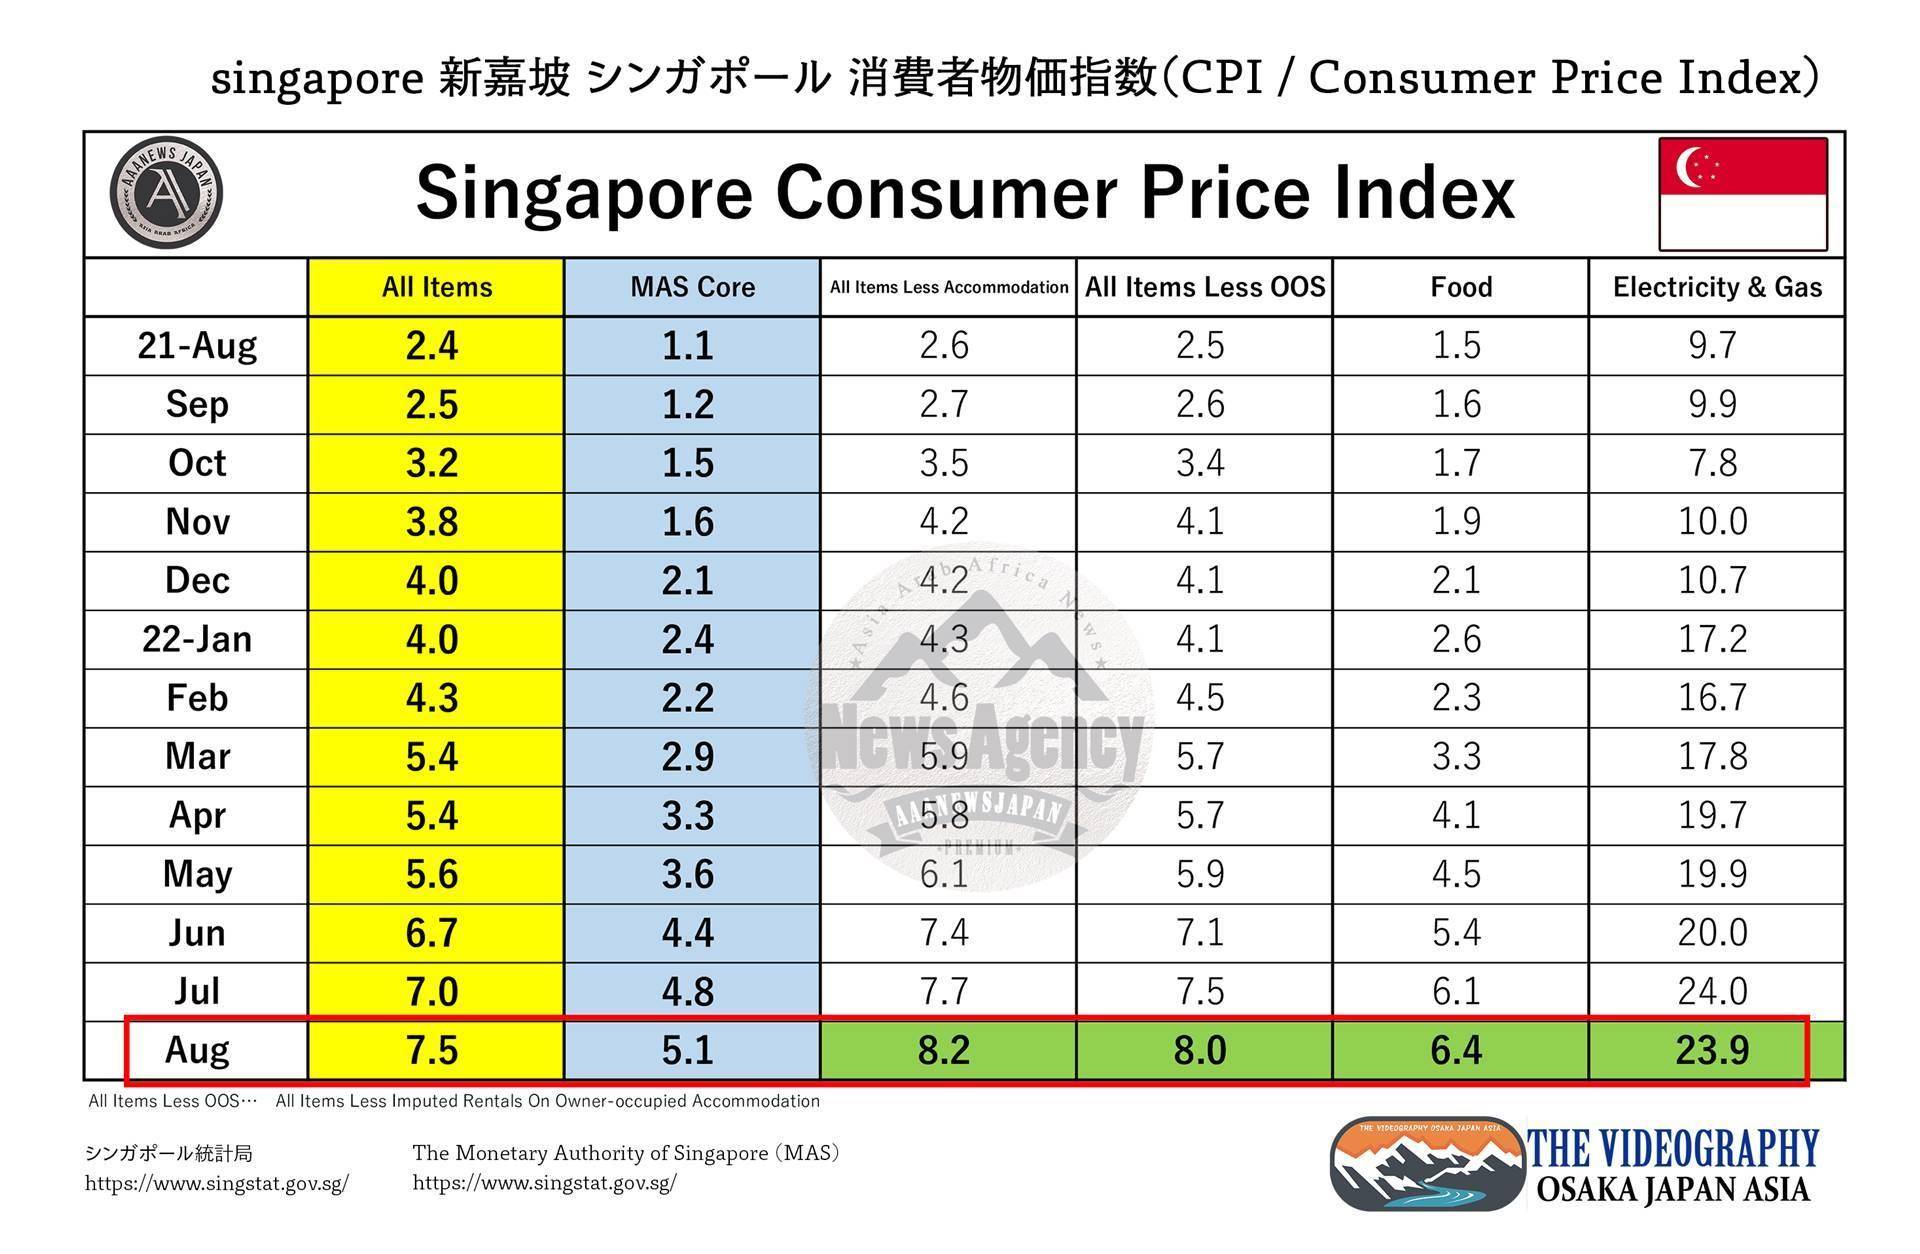 Singapore Consumer Price Index, Aug 2022 ◆CPI – All Items The CPI is commonly used as a measure of consumer price changes in the economy. It tracks the change in prices of a fixed basket of consumption goods and services commonly purchased by the general resident households over time. The CPI covers only consumption expenditure incurred by resident households. It excludes non-consumption expenditures such as purchases of houses, shares and other financial assets and income taxes etc. The CPI – All Items provides a comprehensive overview of the prices of consumer goods and services. Nevertheless, useful information can also be revealed by complementary CPI series derived by excluding specific items in the All Items basket. For example, two other CPI series reported on a monthly basis are the CPI less imputed rentals on owner-occupied accommodation and the MAS Core Inflation.